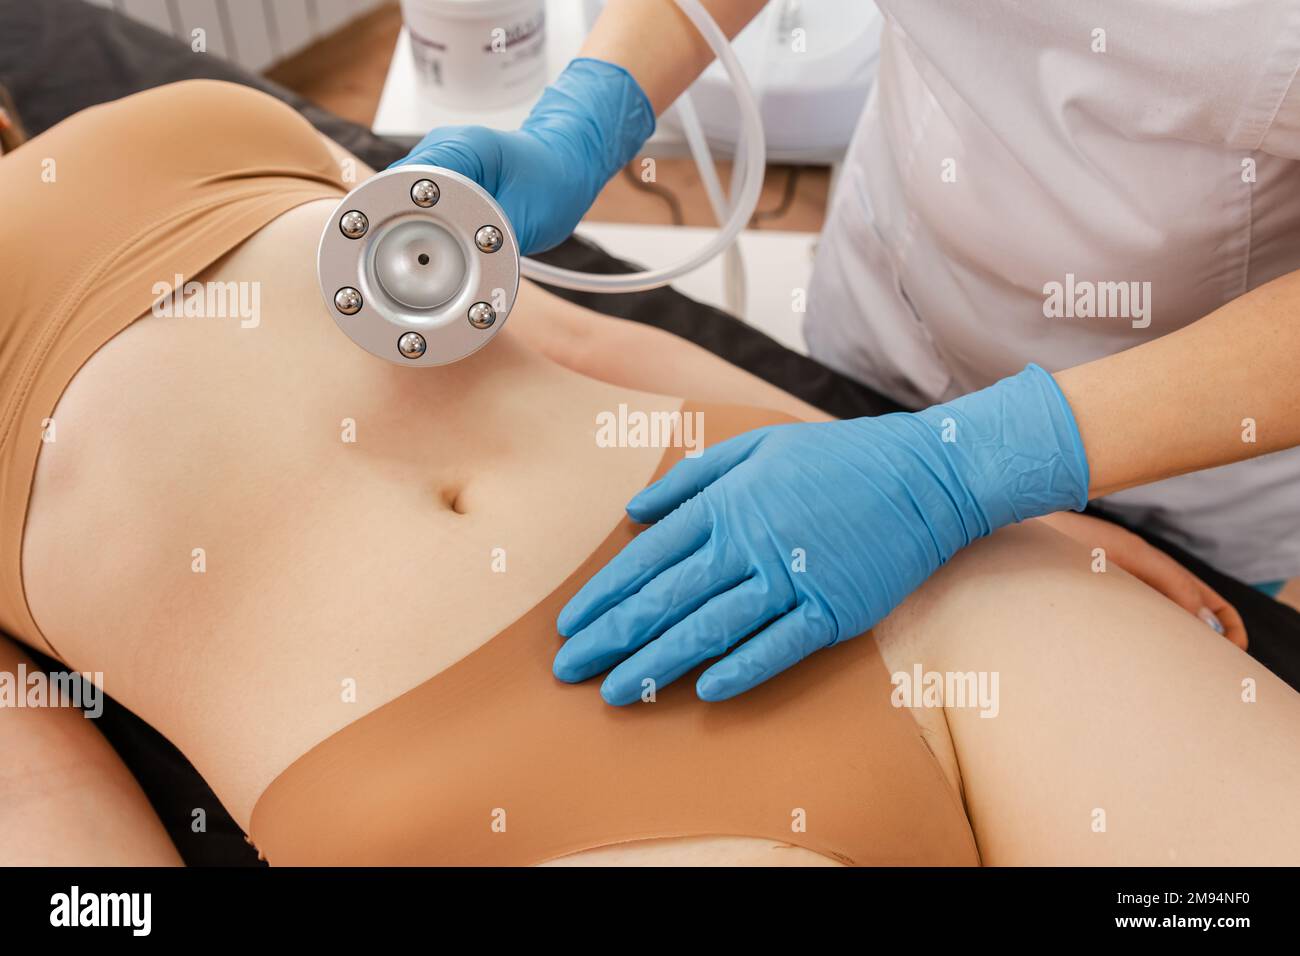 Destruction of cellulite in the abdominal area by ultrasound device. Stock Photo